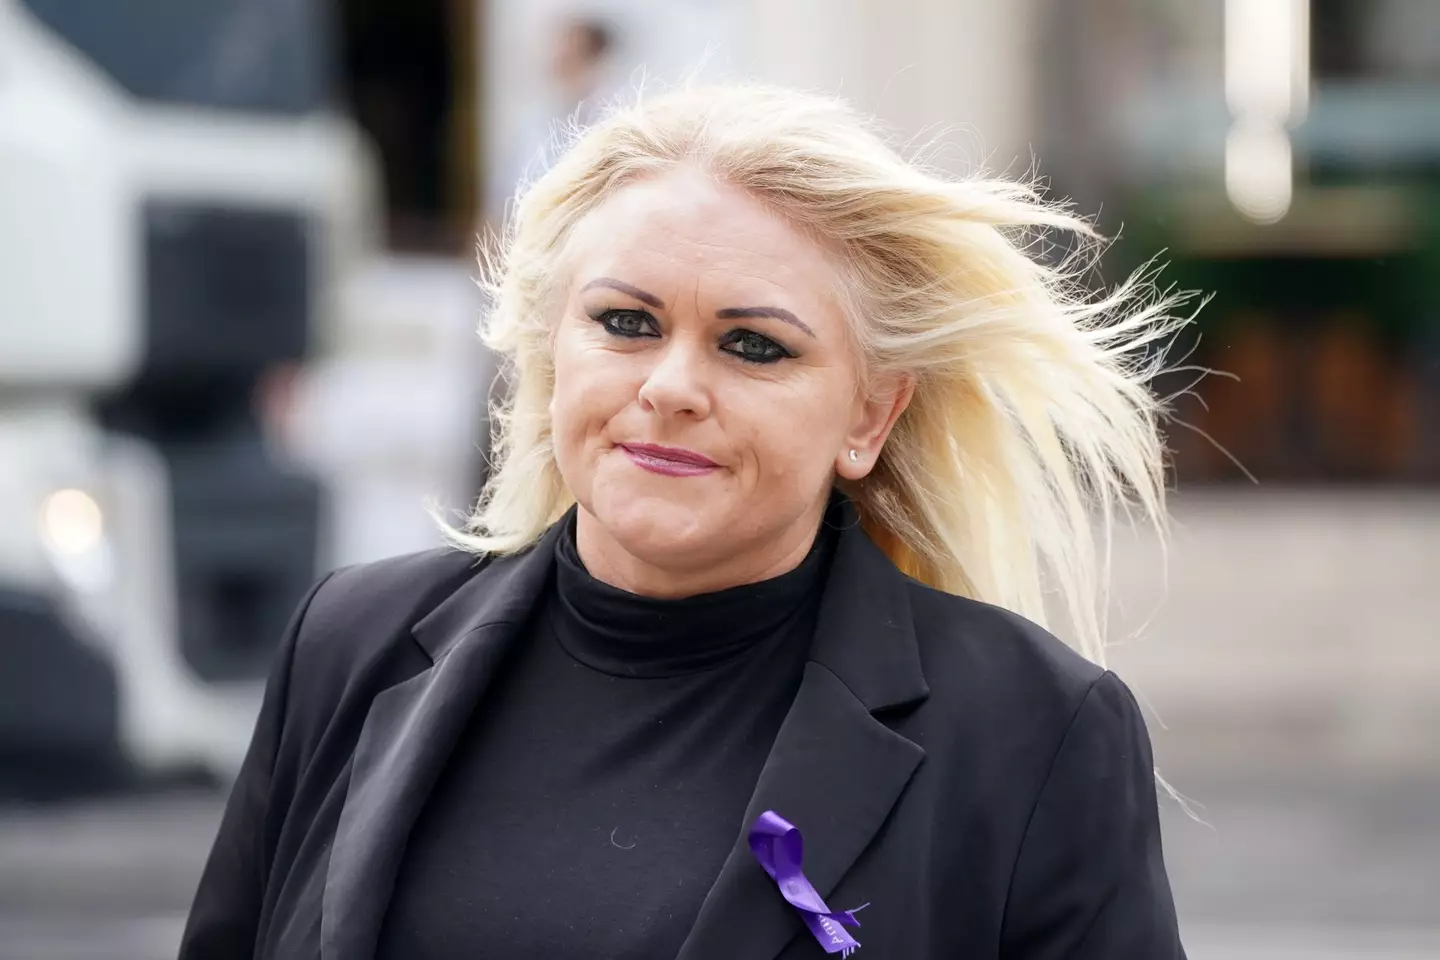 Hollie Dance has vowed to appeal the decision to turn her son's life support off.